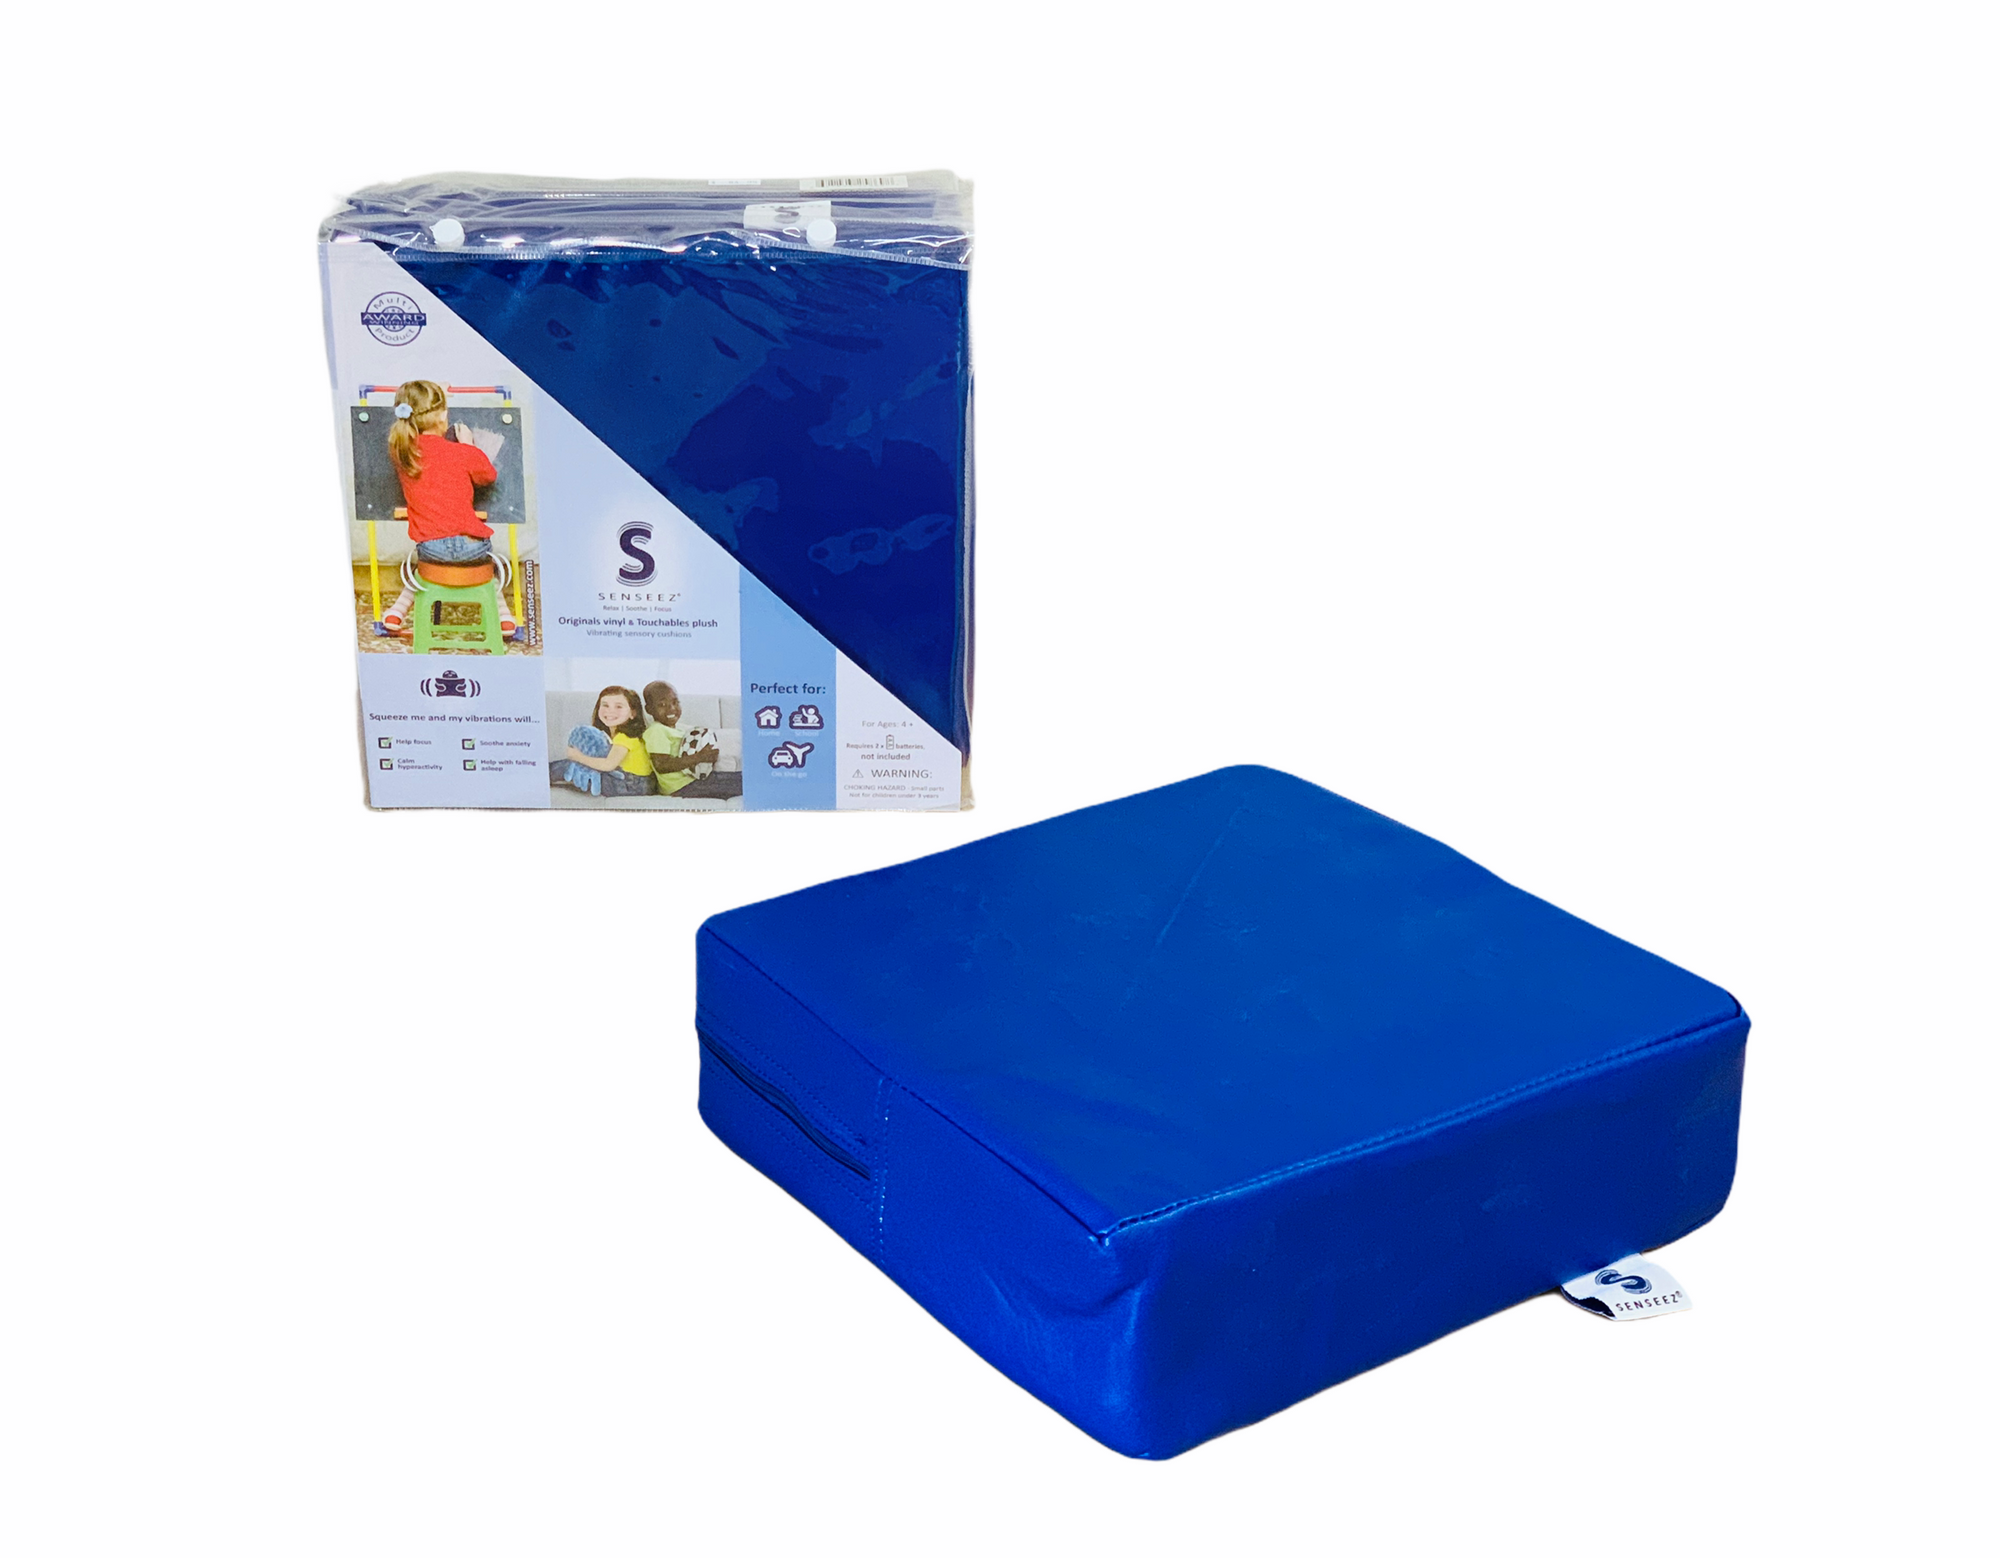 the Senseez Vibrating Cushion - Blue Square on display in front of it's packet